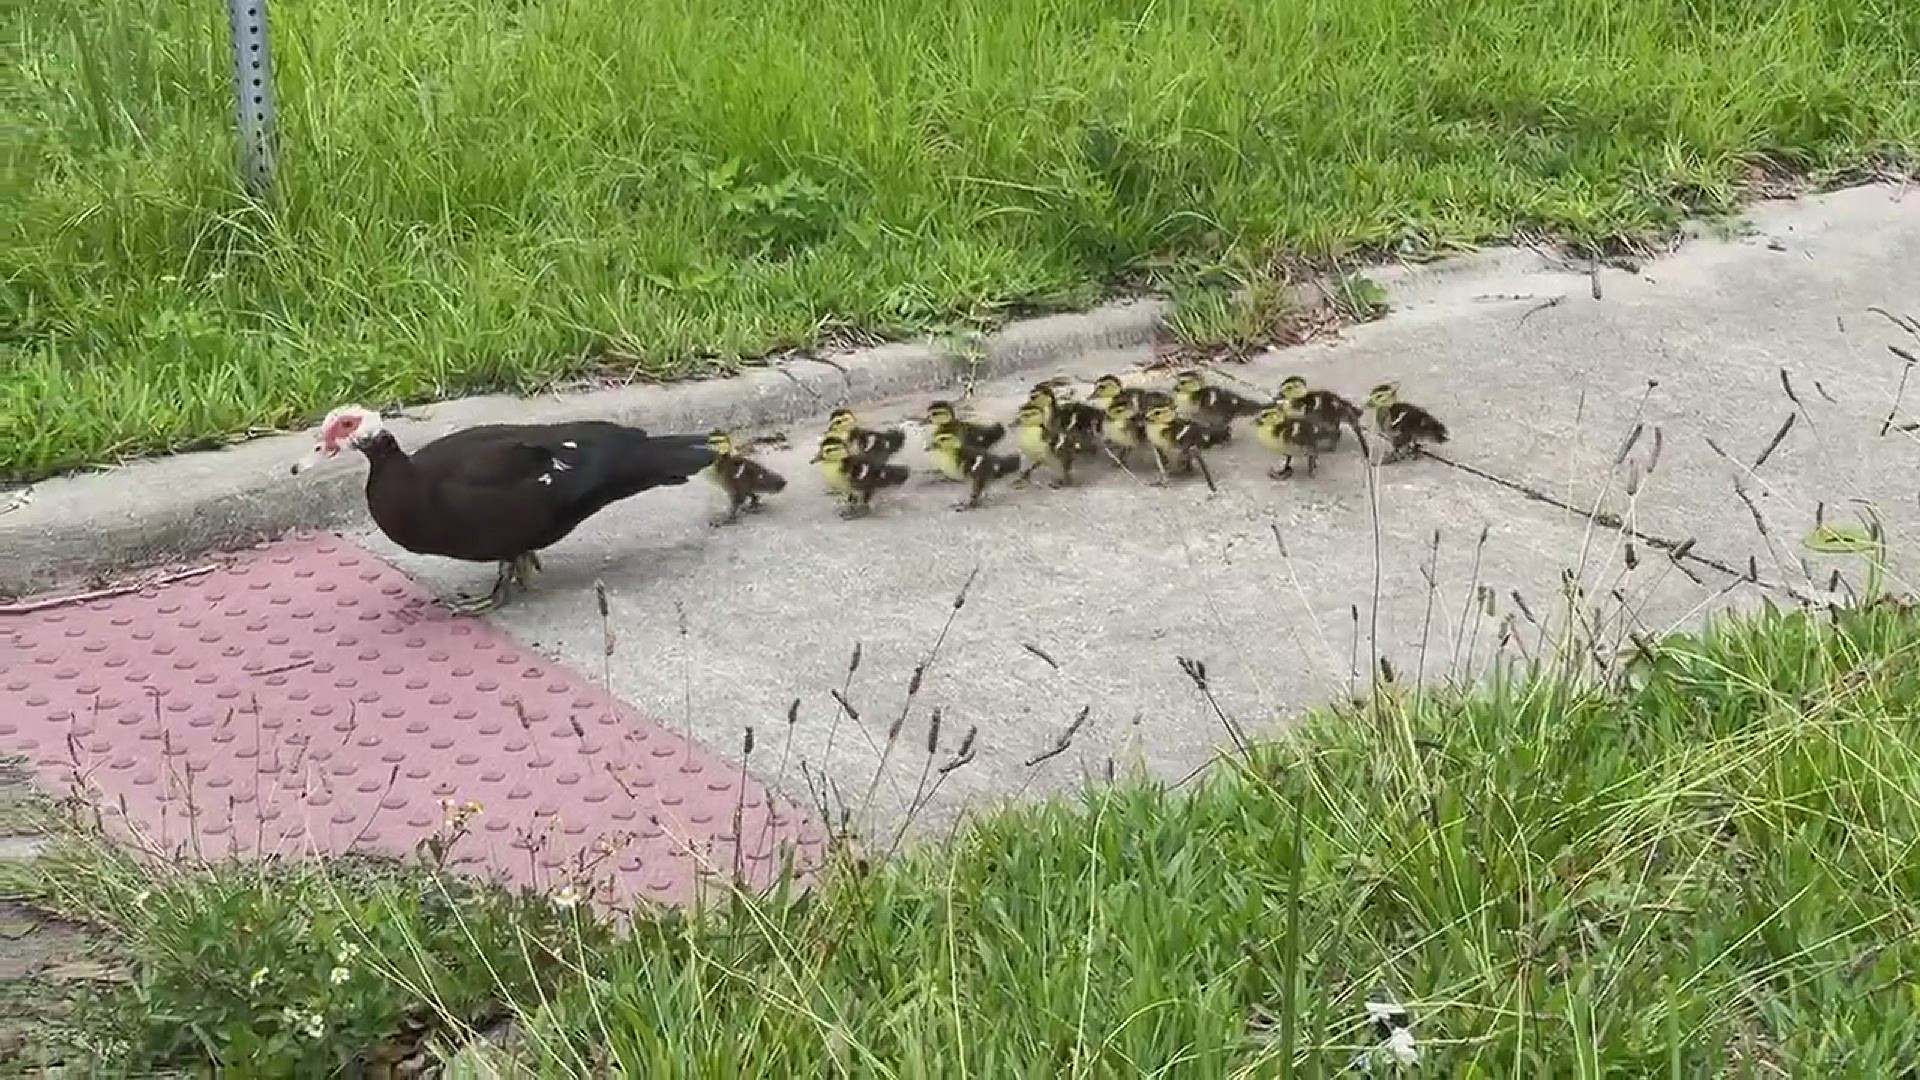 The momma duck and 14 ducklings went for a walk through Riverside Wednesday morning with some assistance from First Coast News Photojournalist Jerry McGovern!